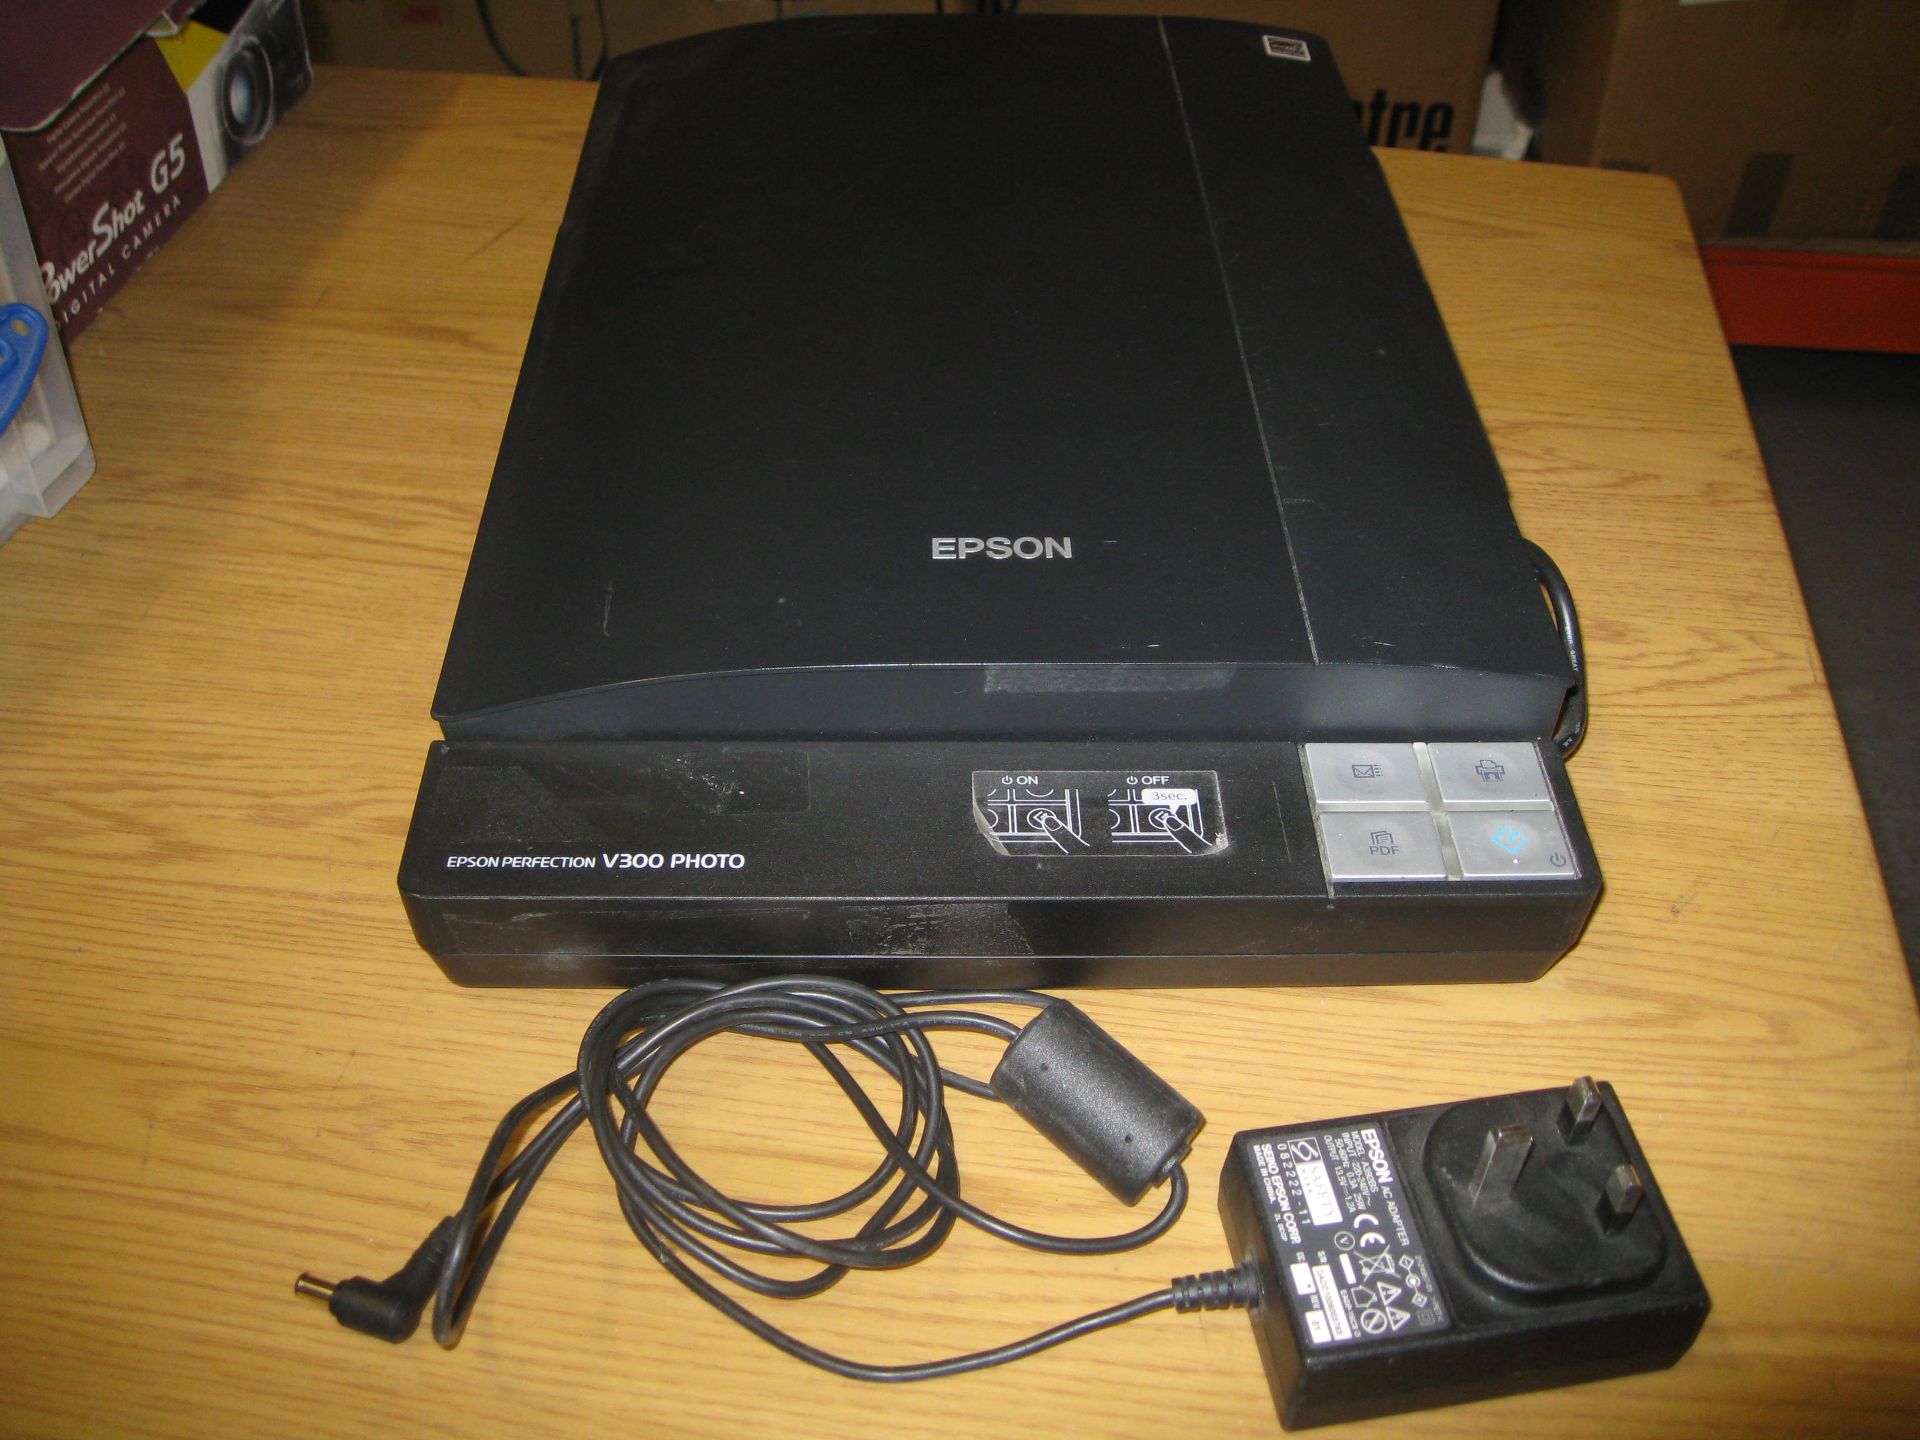 EPSON PERFECTION V300 PHOTO FLATBED SCANNER WITH PSU.